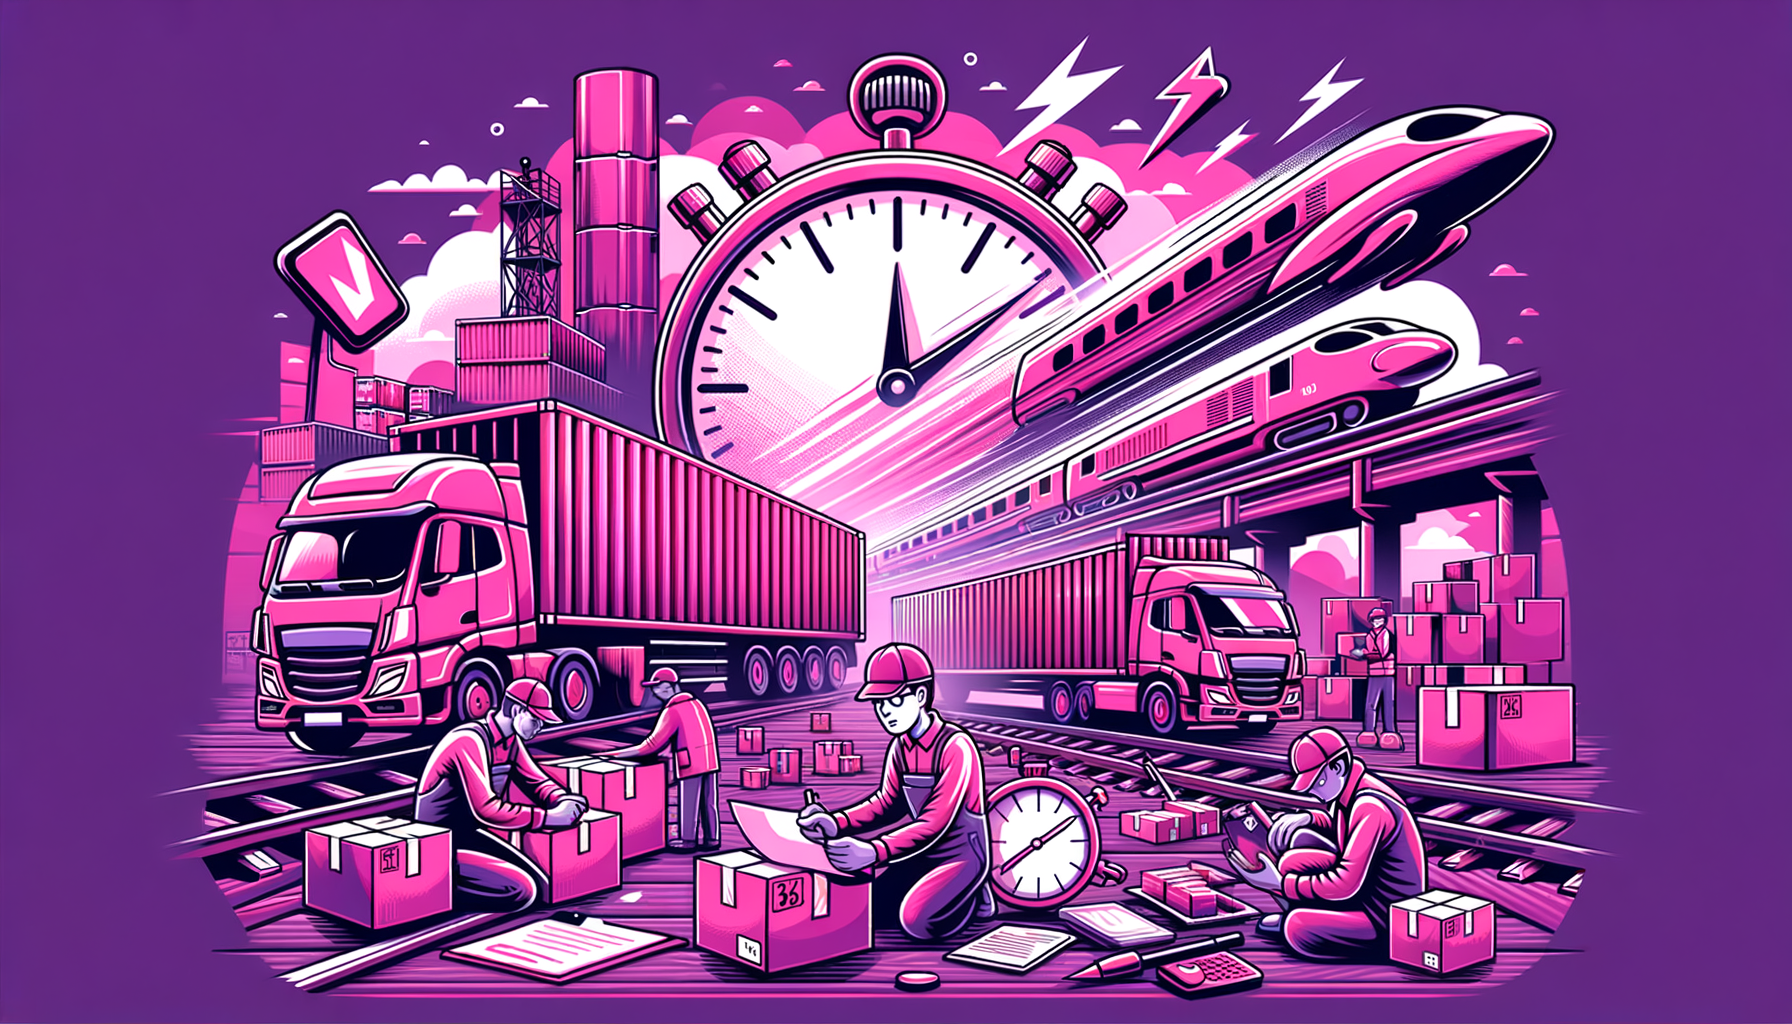 Cartoon-like illustration of a fuchsia delivery truck speeding on a road symbolizing efficient freight management for speedy deliveries.